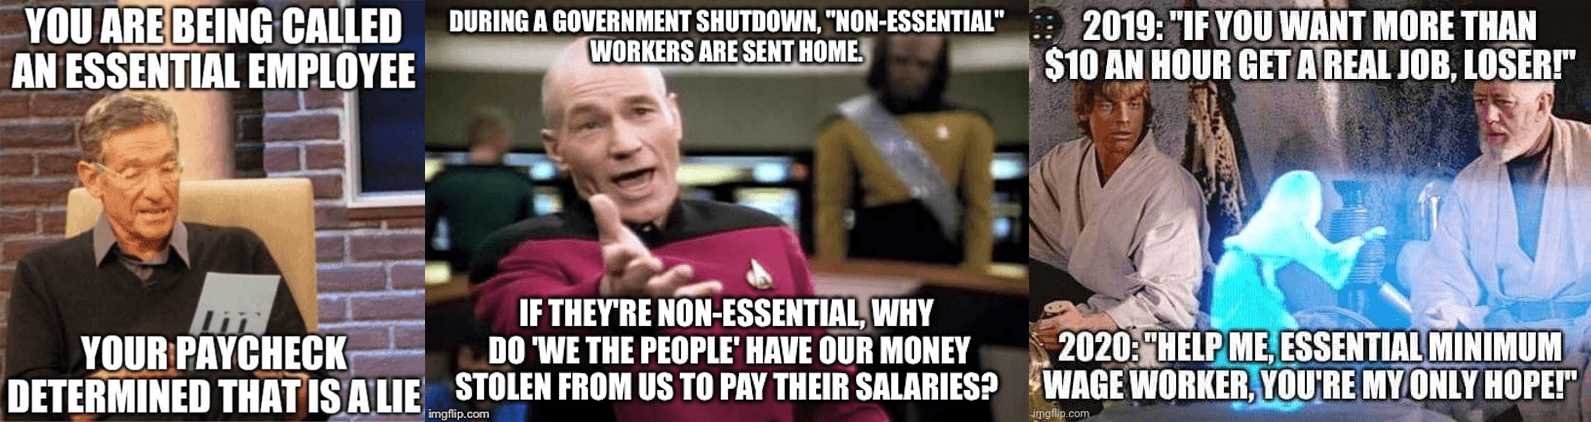 Memes about how essential employees are paid poorly.